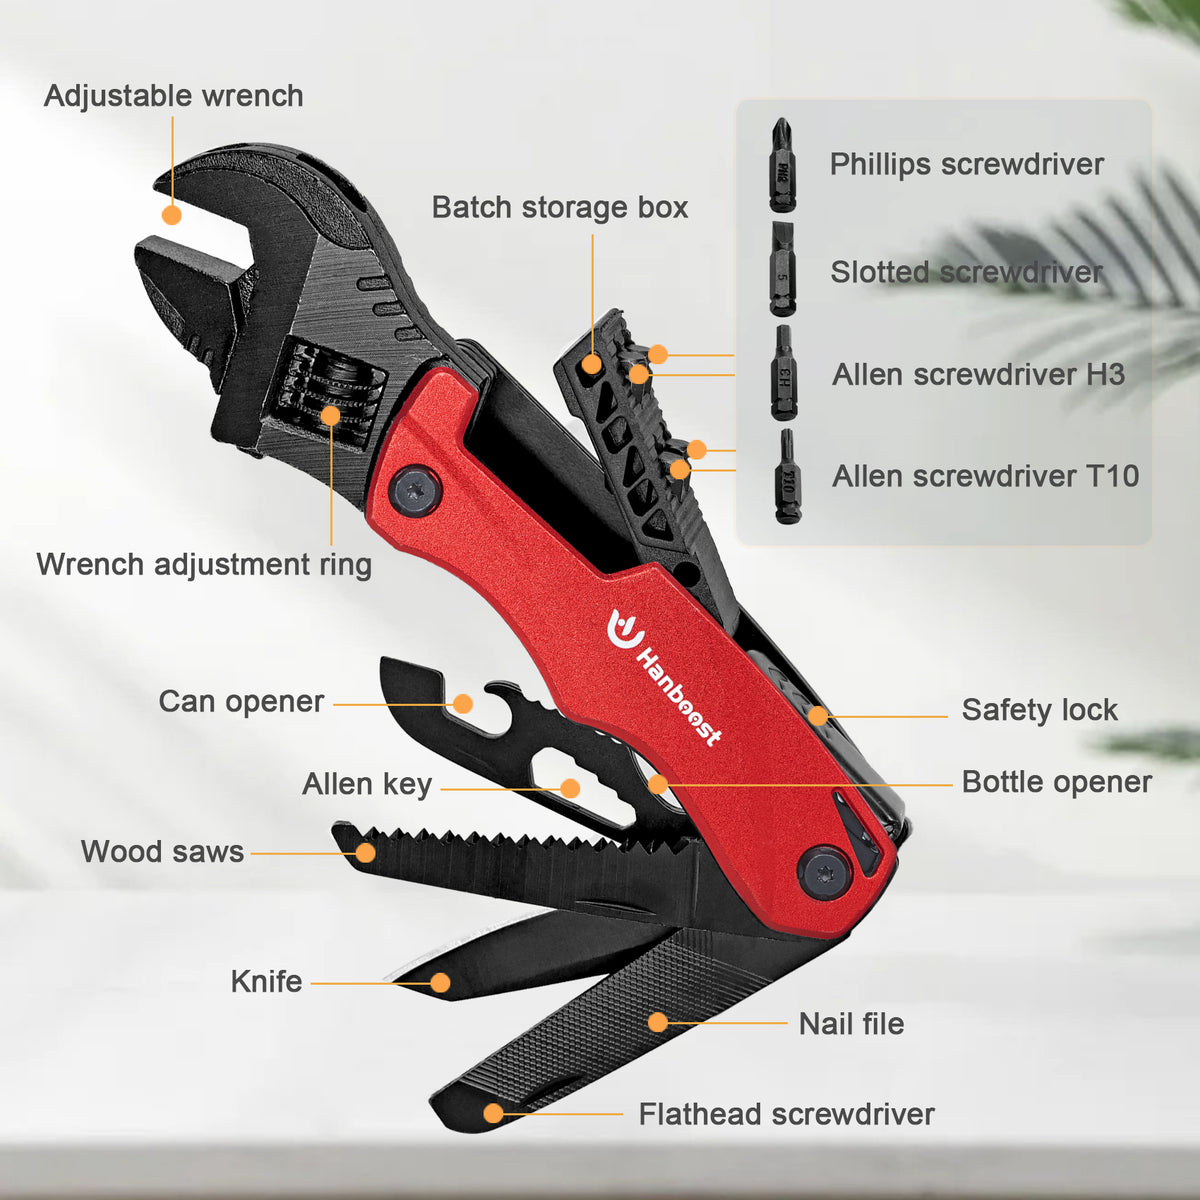 Hanboost M1 Multitool 12 In 1 Wrench for Outdoor Camping (Red)